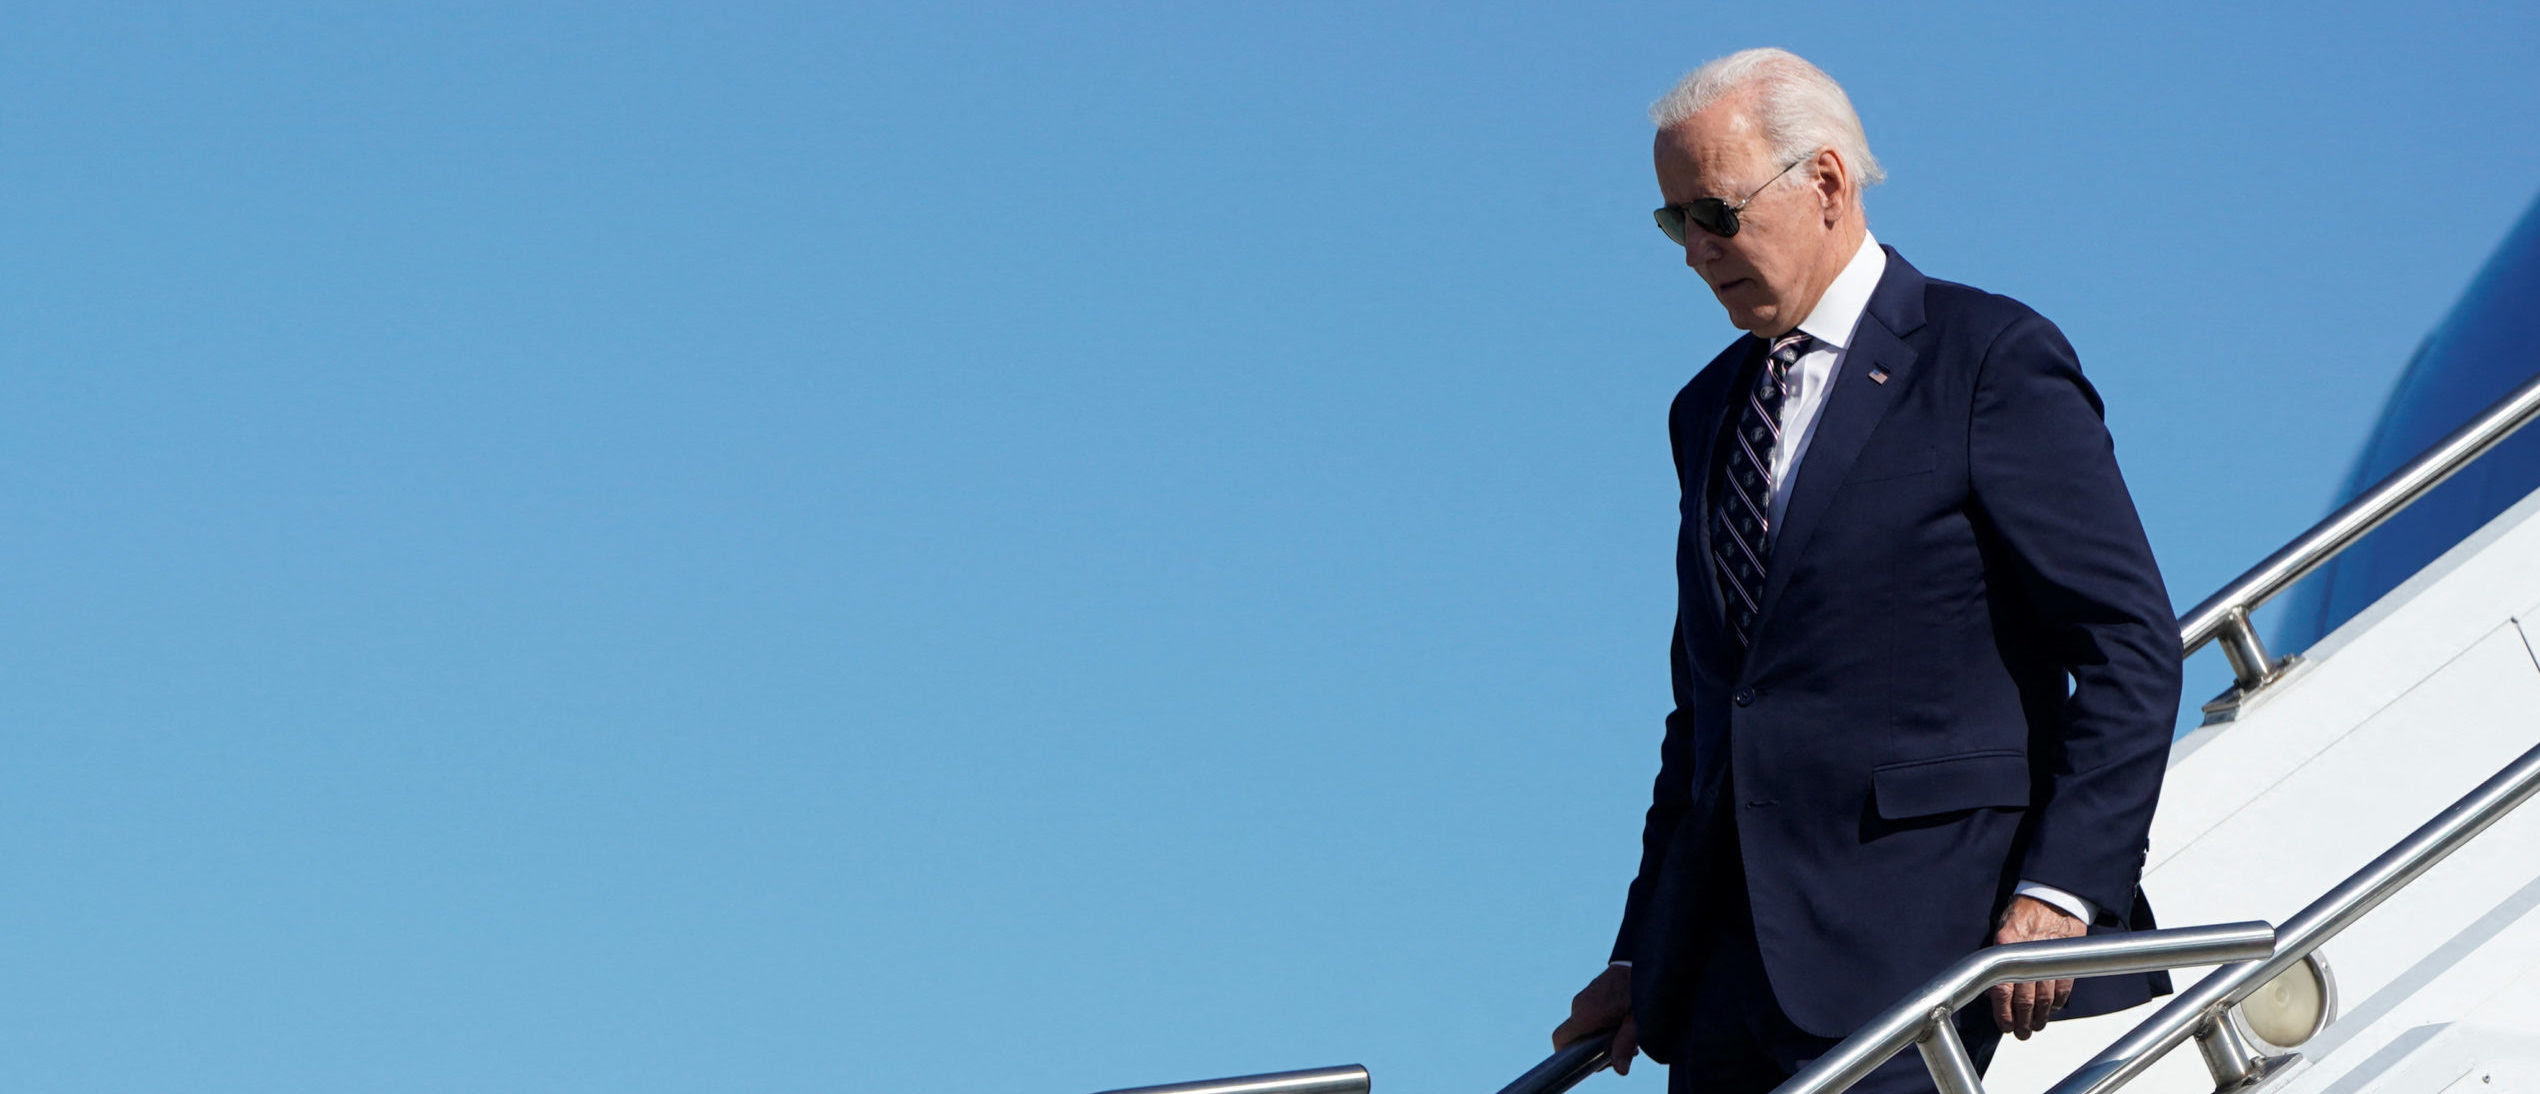 Biden Asks If US Will Be A ‘Nation Of Division’ After Smearing Millions As Threats To Democracy